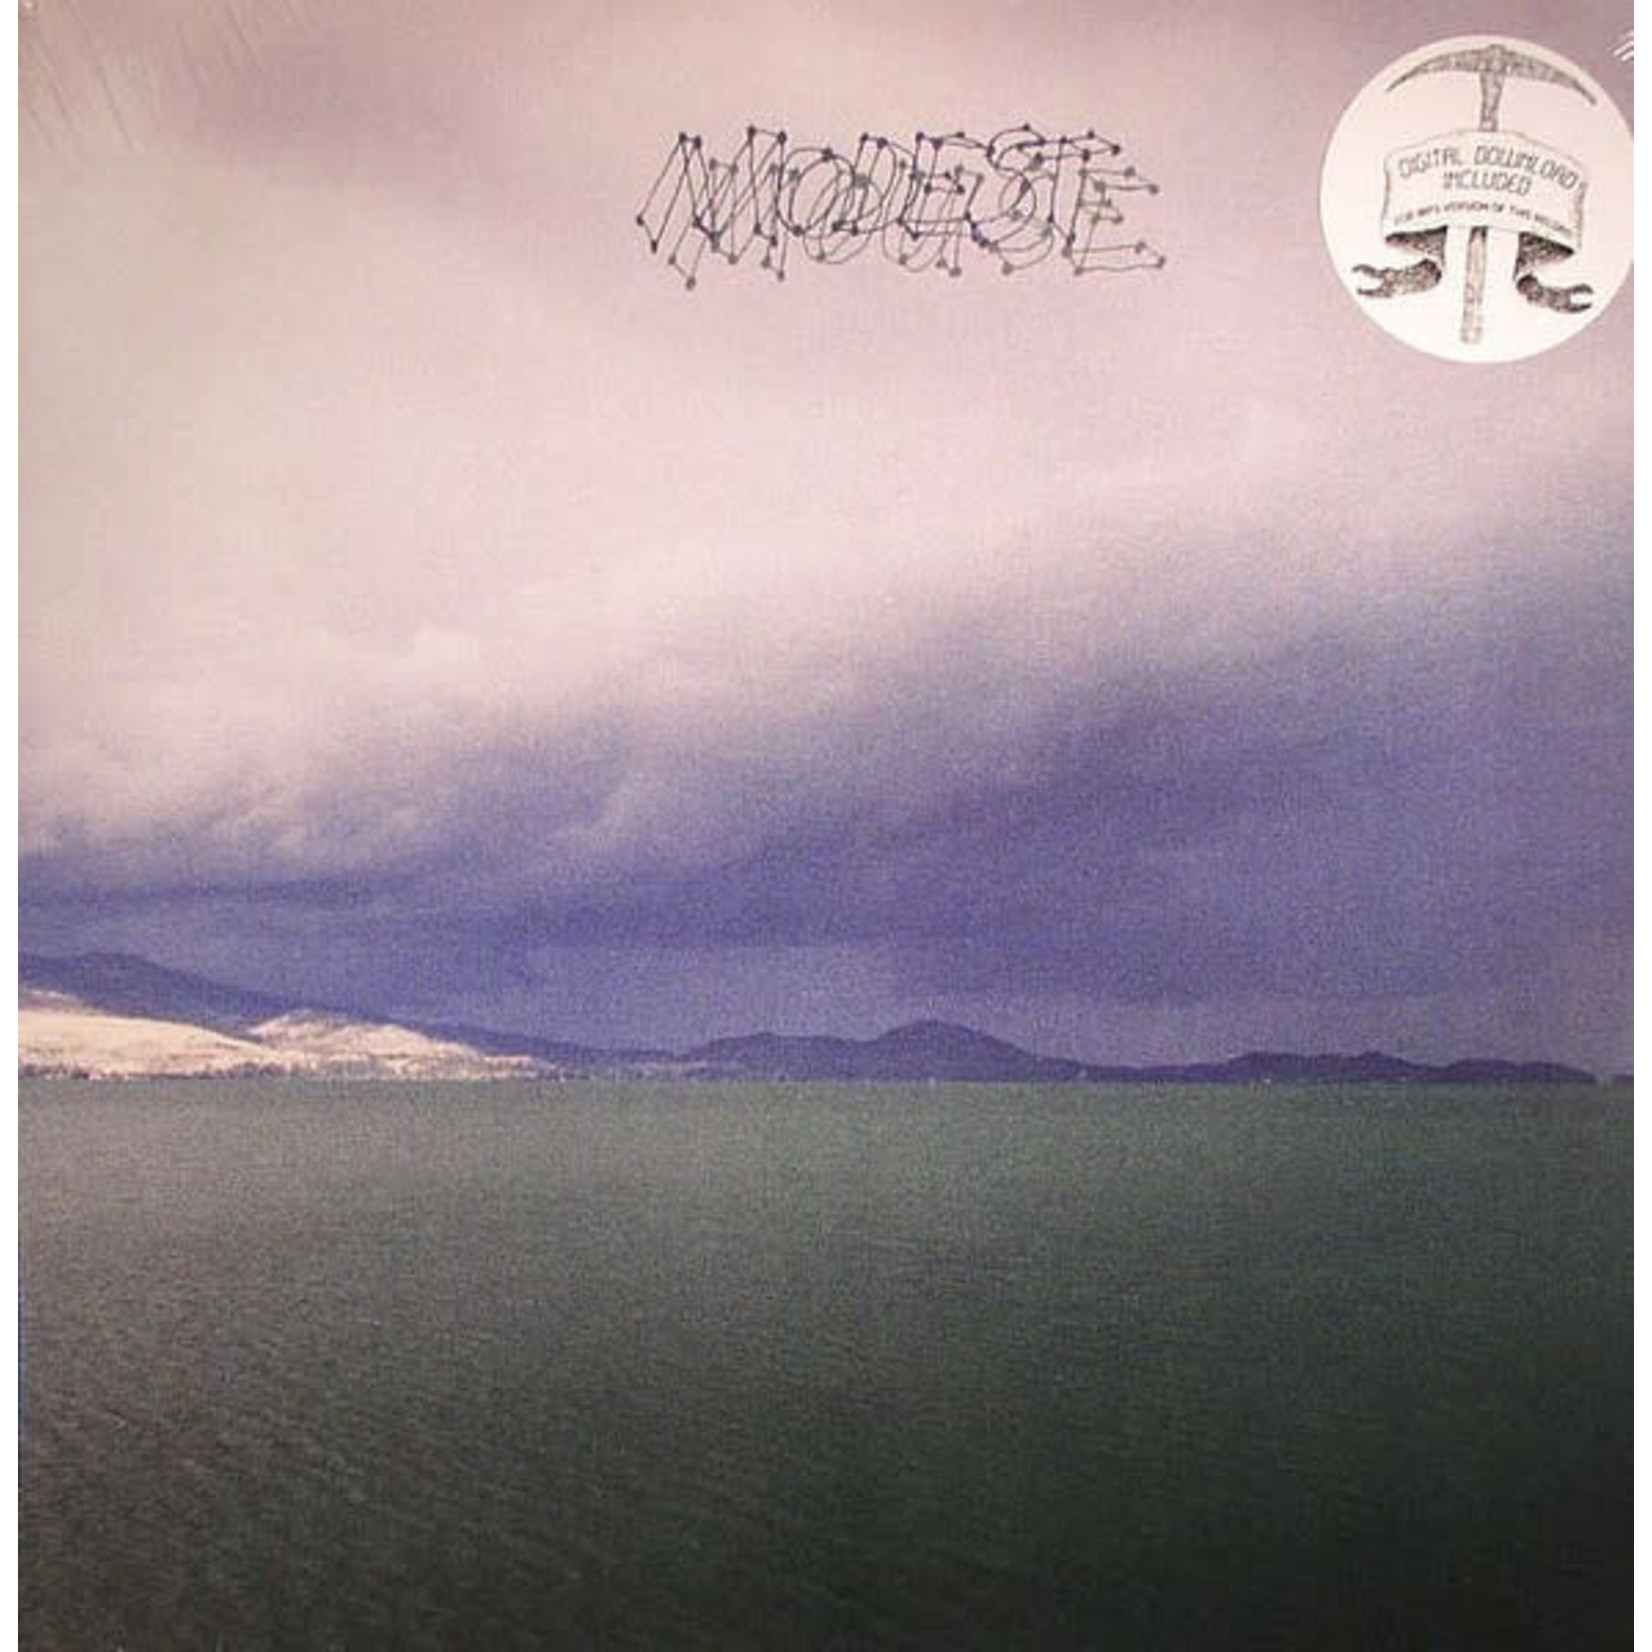 Glacial Pace Modest Mouse - The Fruit That Ate Itself (12") [45RPM]